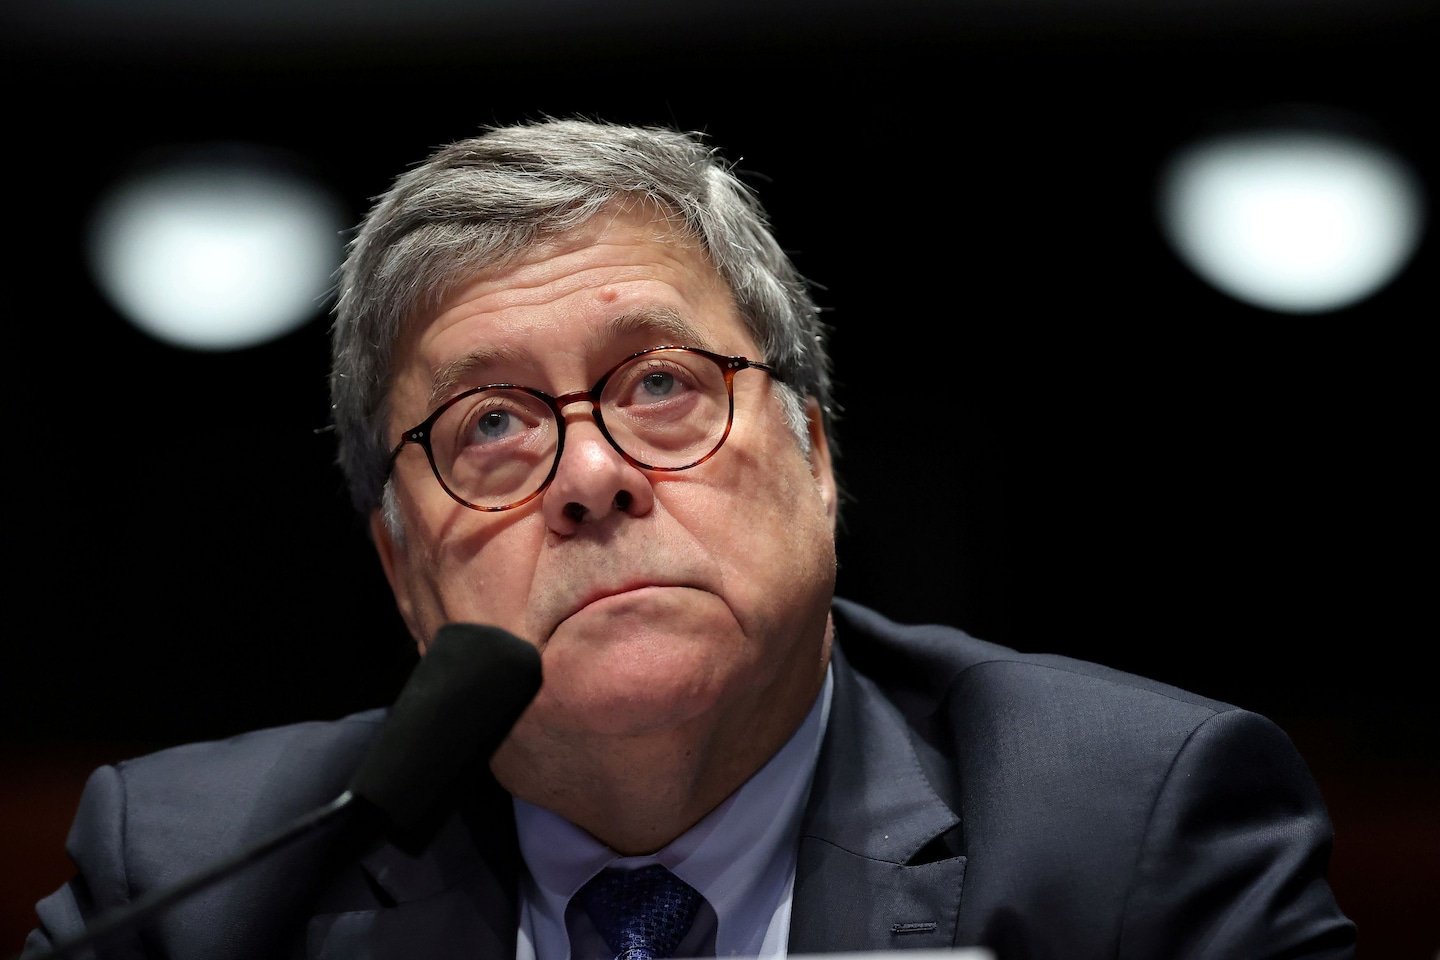 Barr claims a man collected 1,700 ballots and filled them out as he pleased. Prosecutors say that’s not what happened.